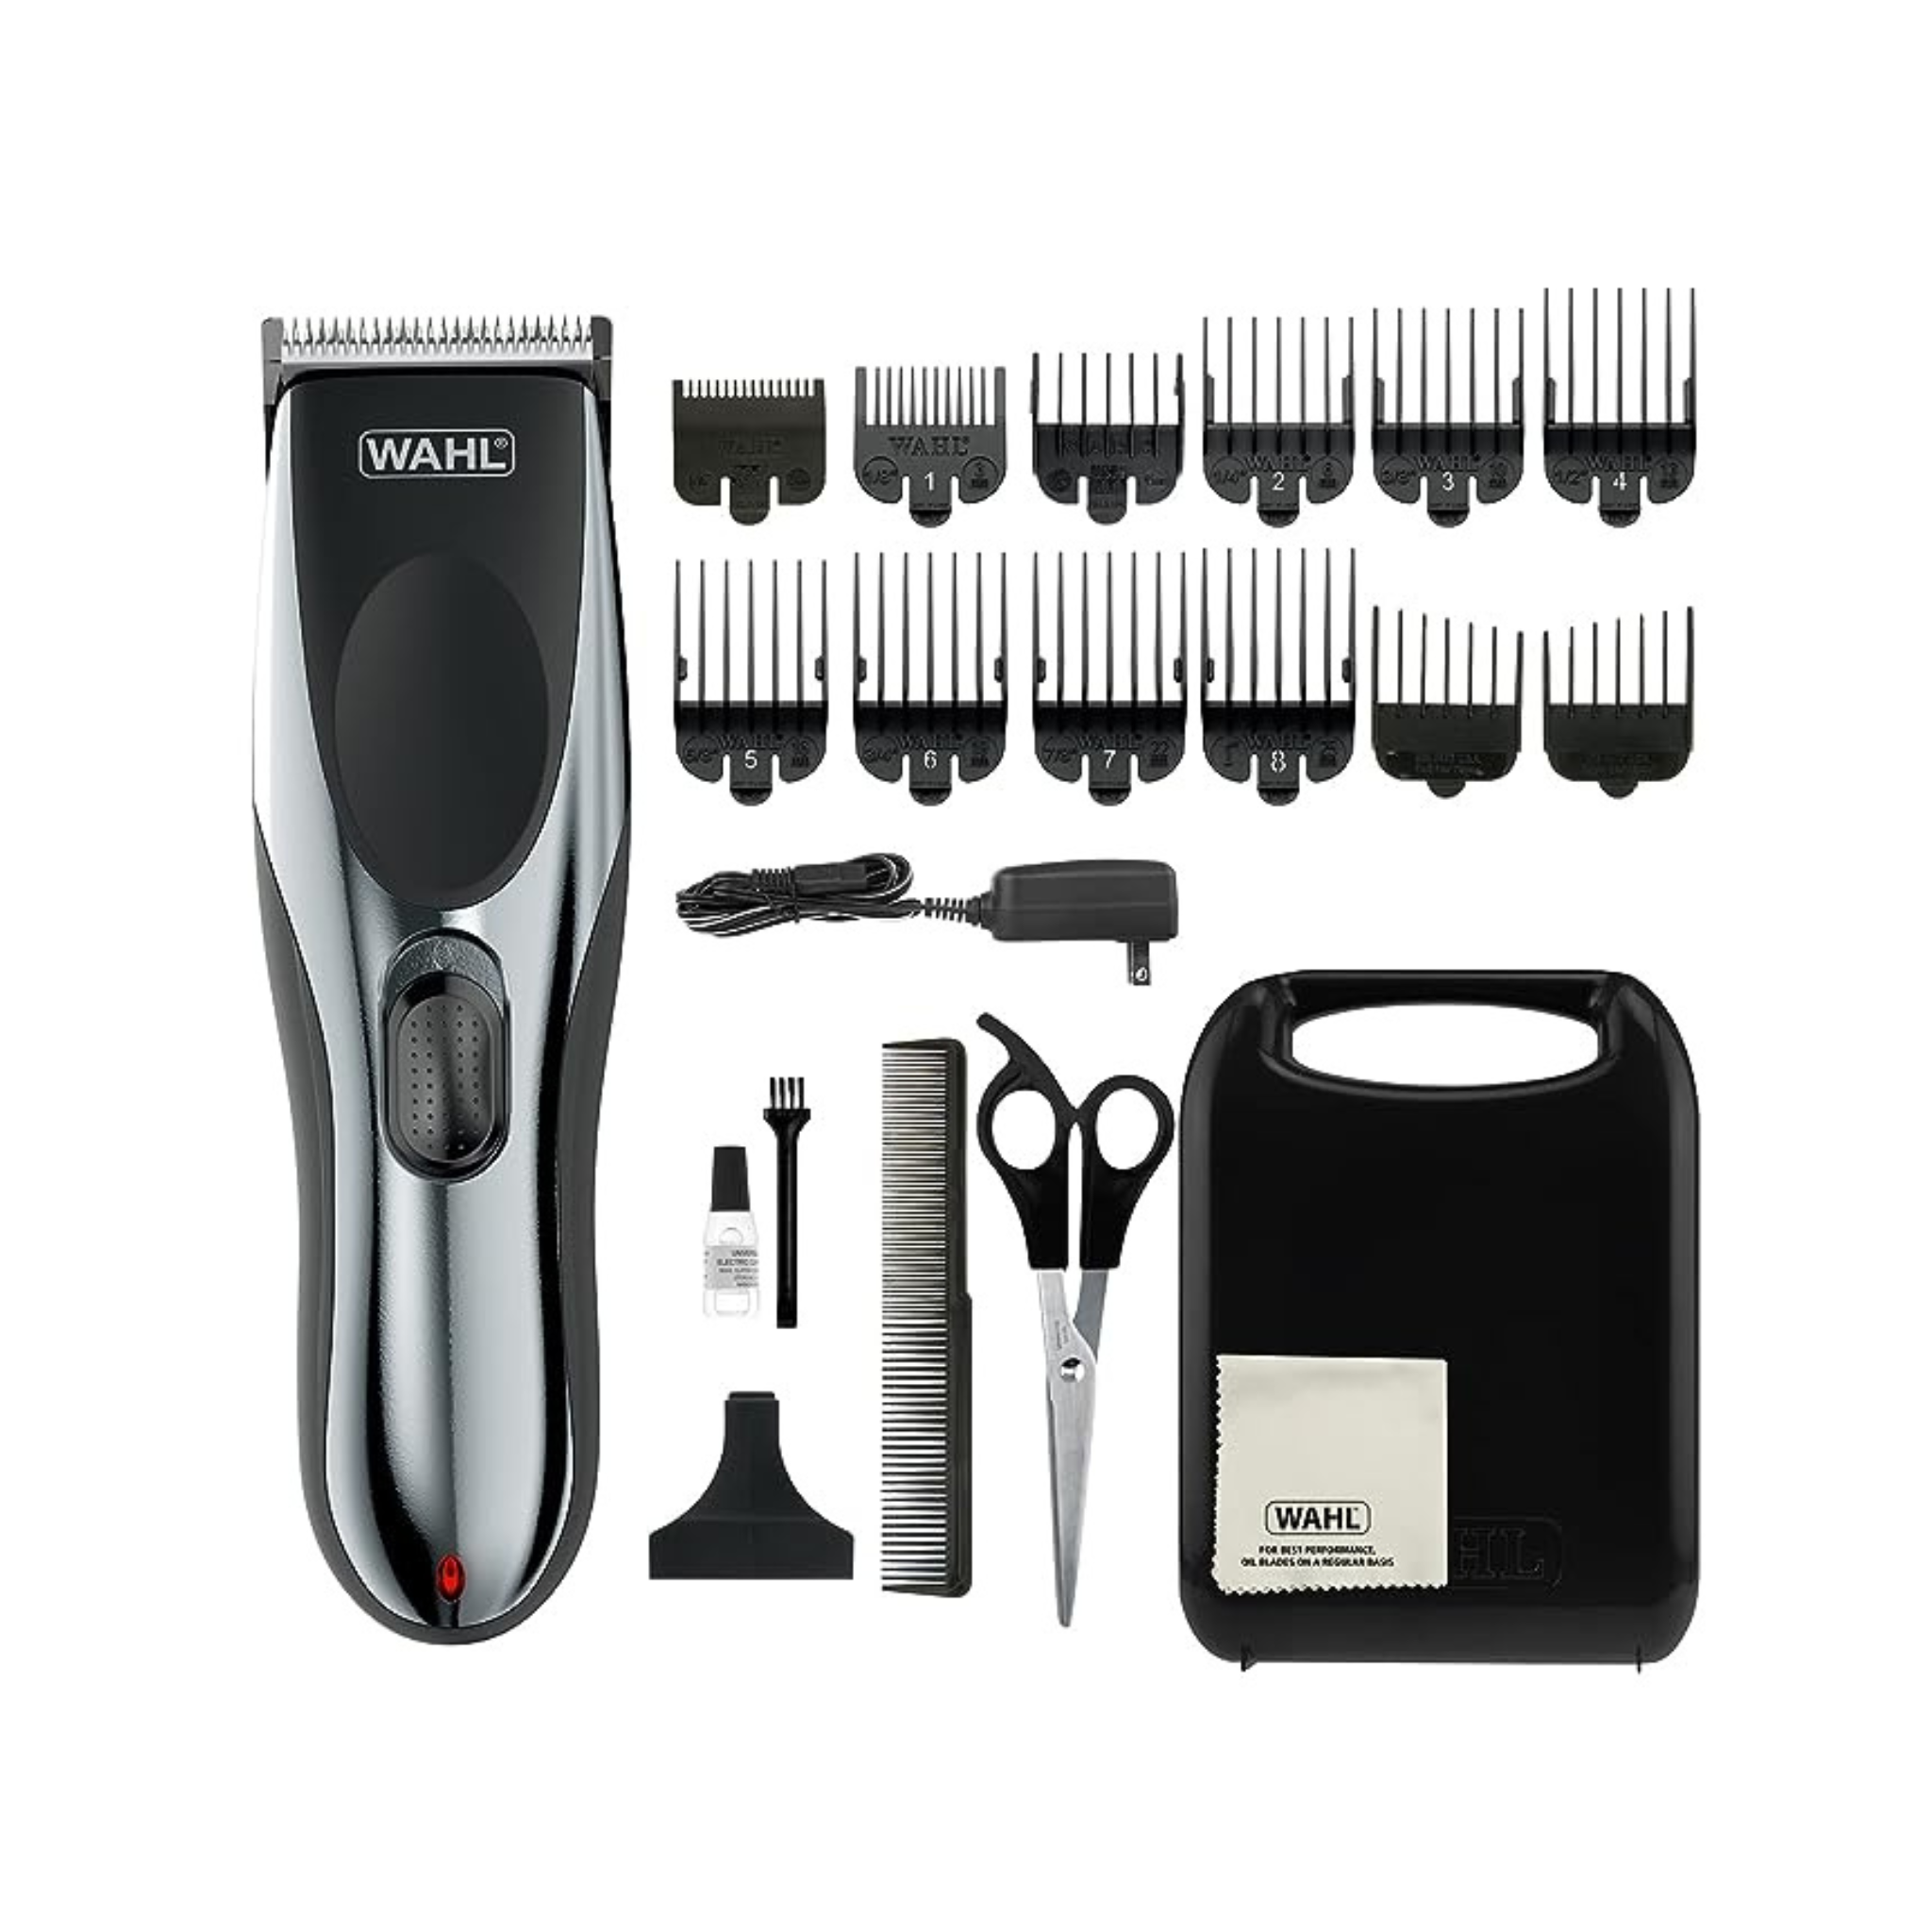 Rechargeable Cord/Cordless Haircutting & Trimming Kit